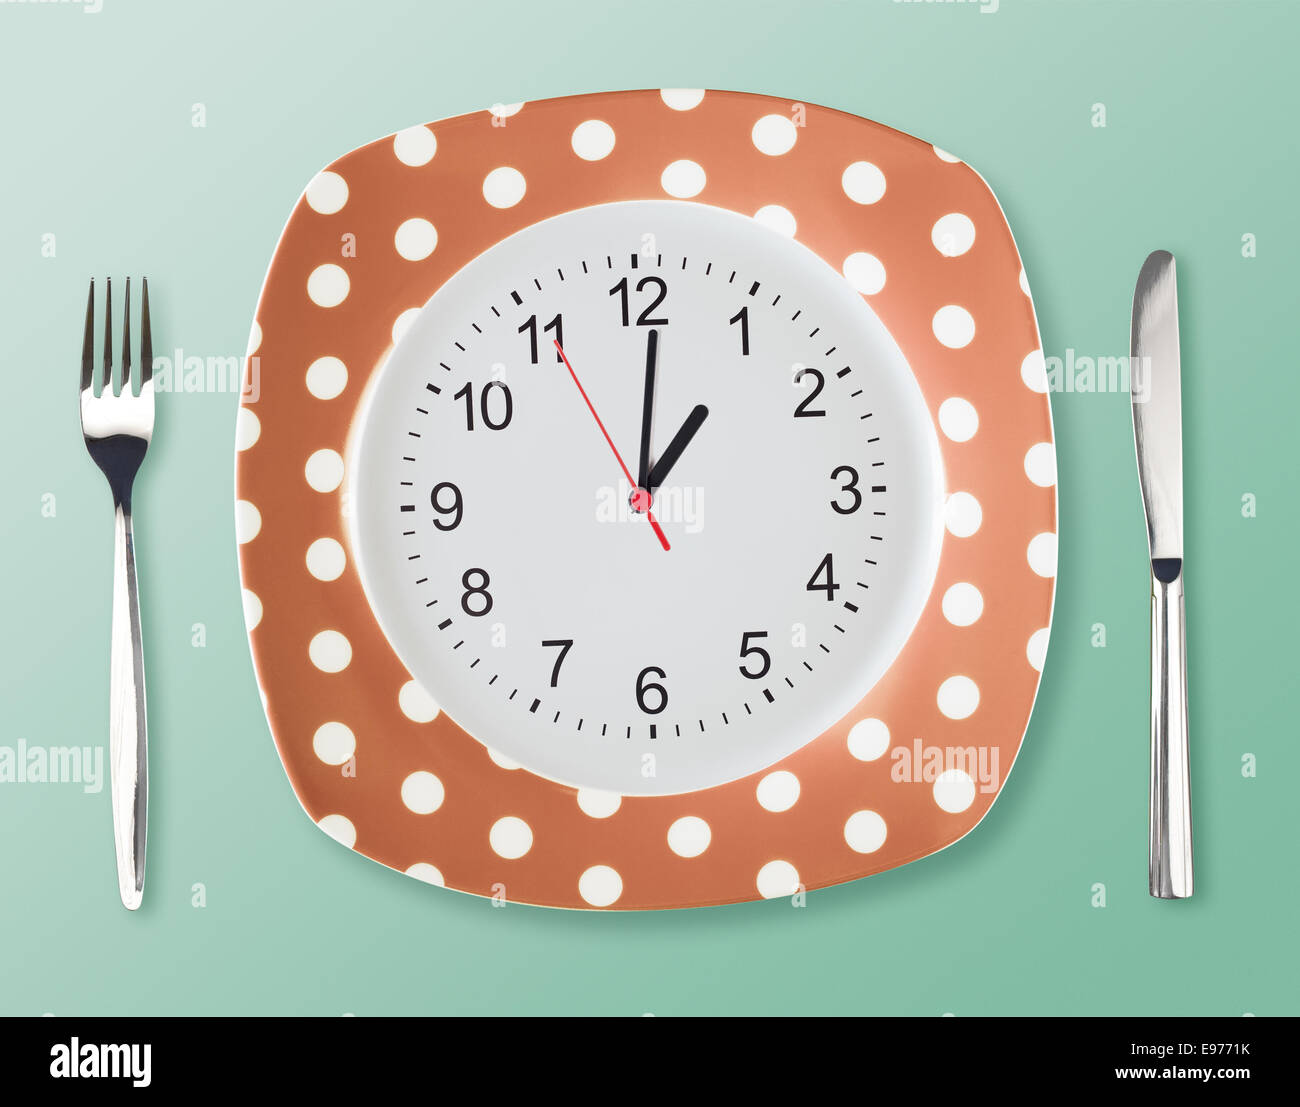 Dinner plate retro style with clock face fork an tableknife Stock Photo